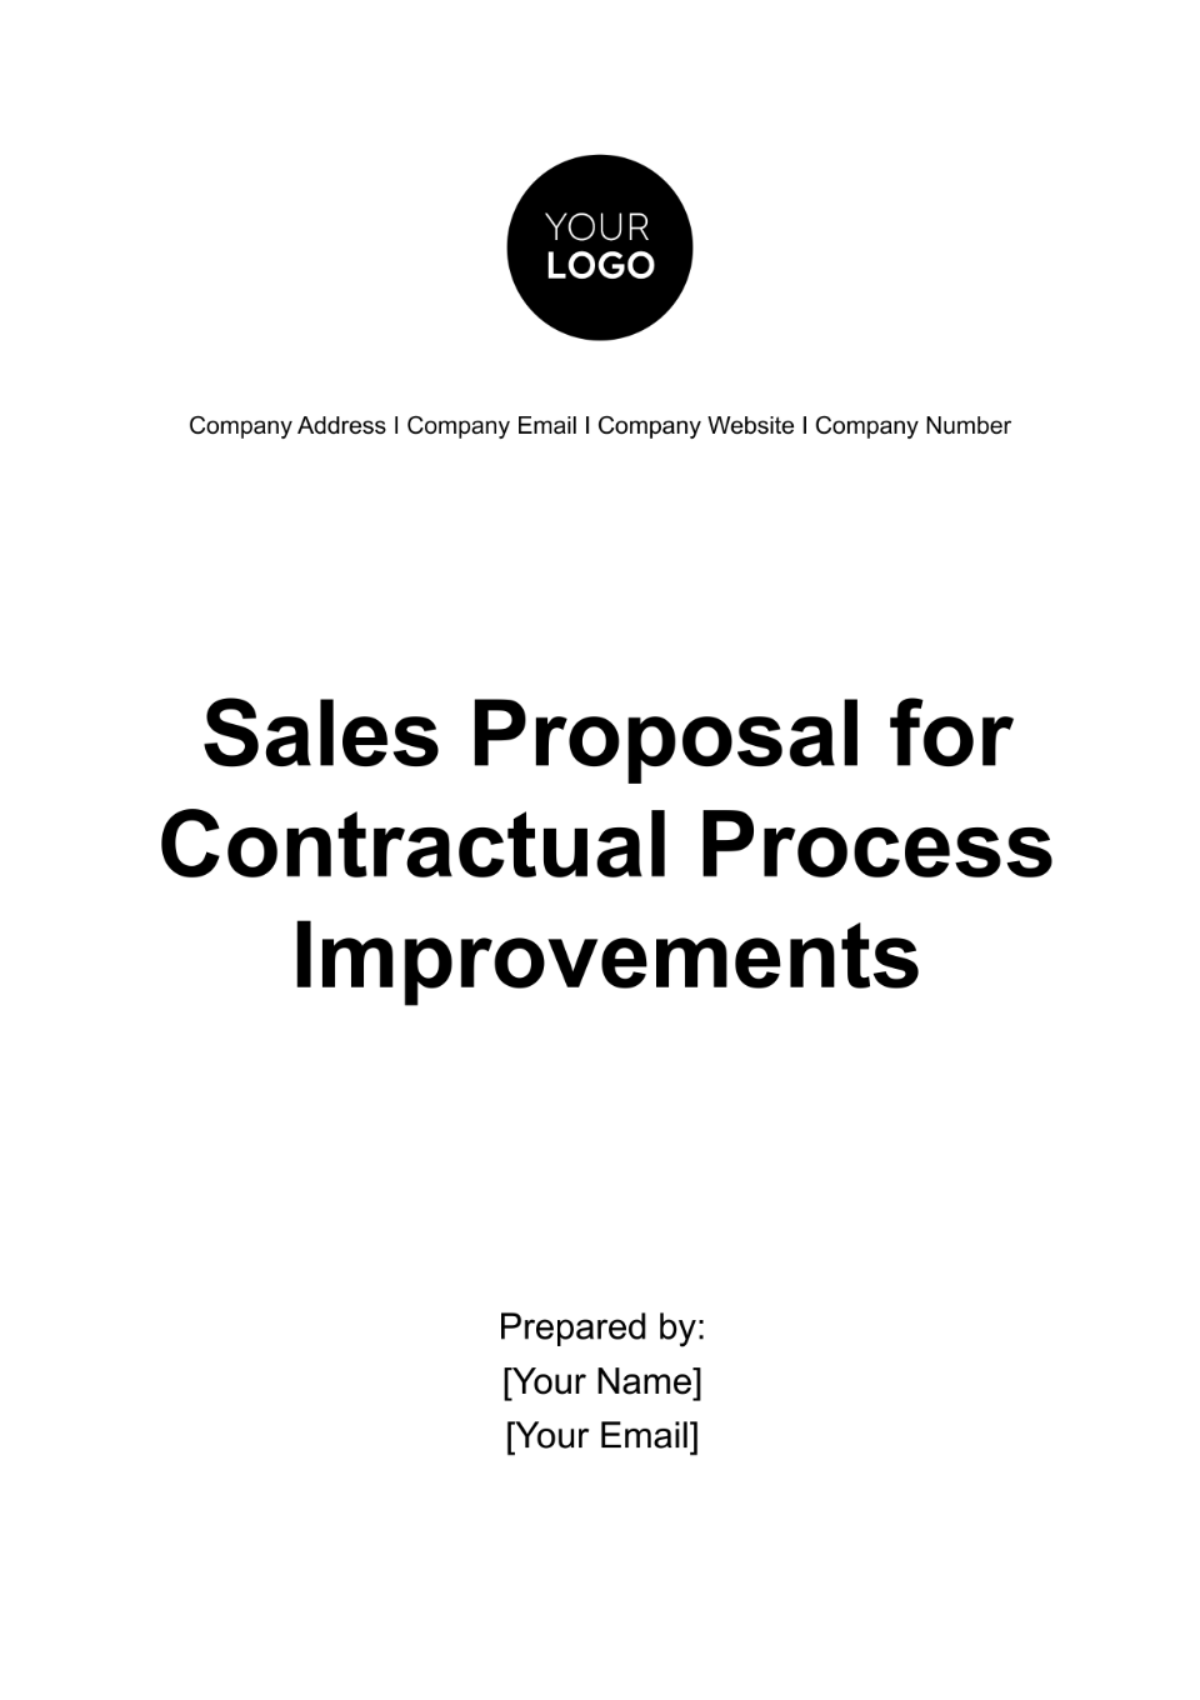 Sales Proposal for Contractual Process Improvements Template